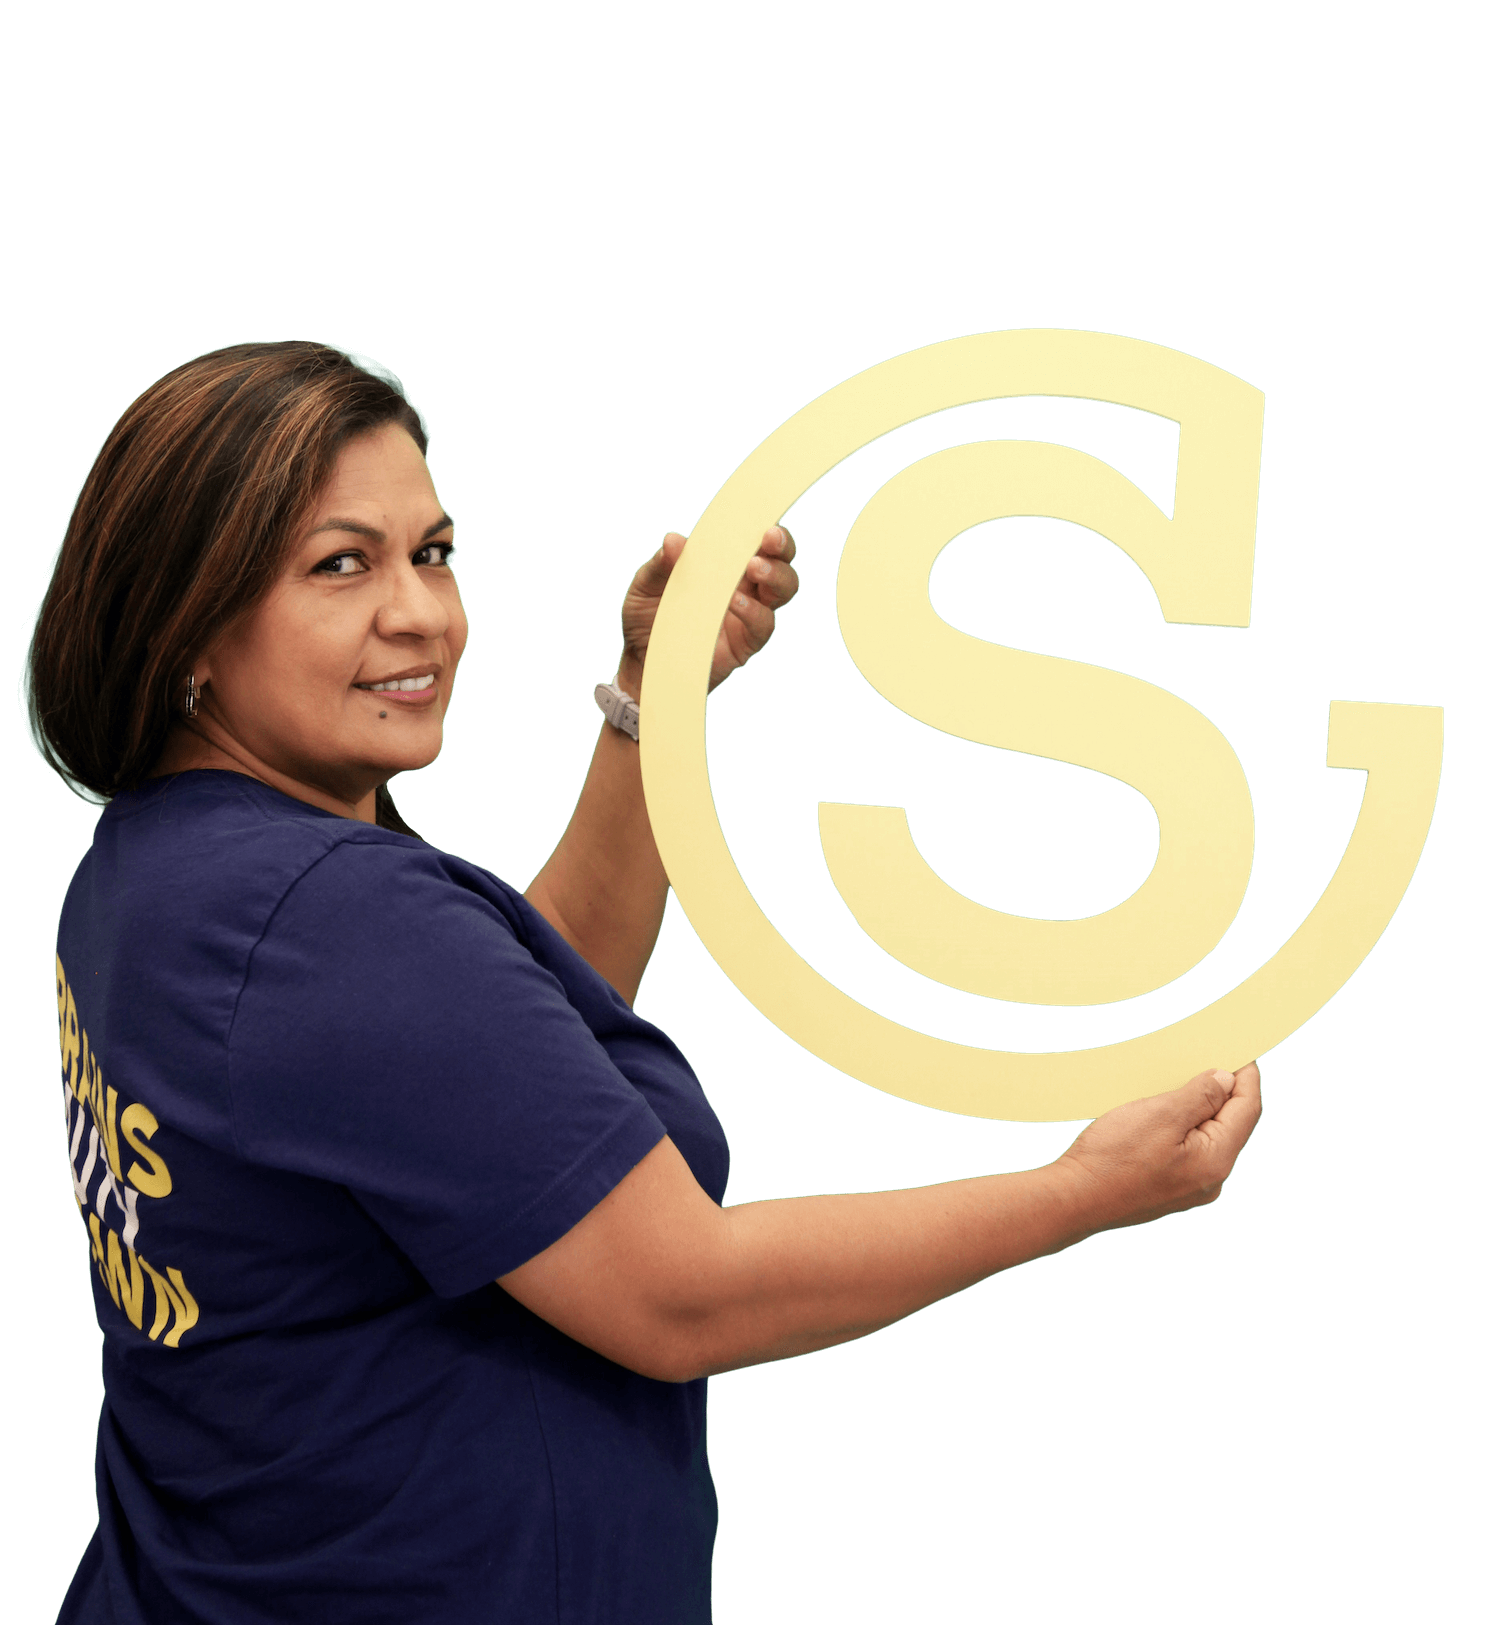 Southeastern employee holding a die cut company logo and smiling at camera-1